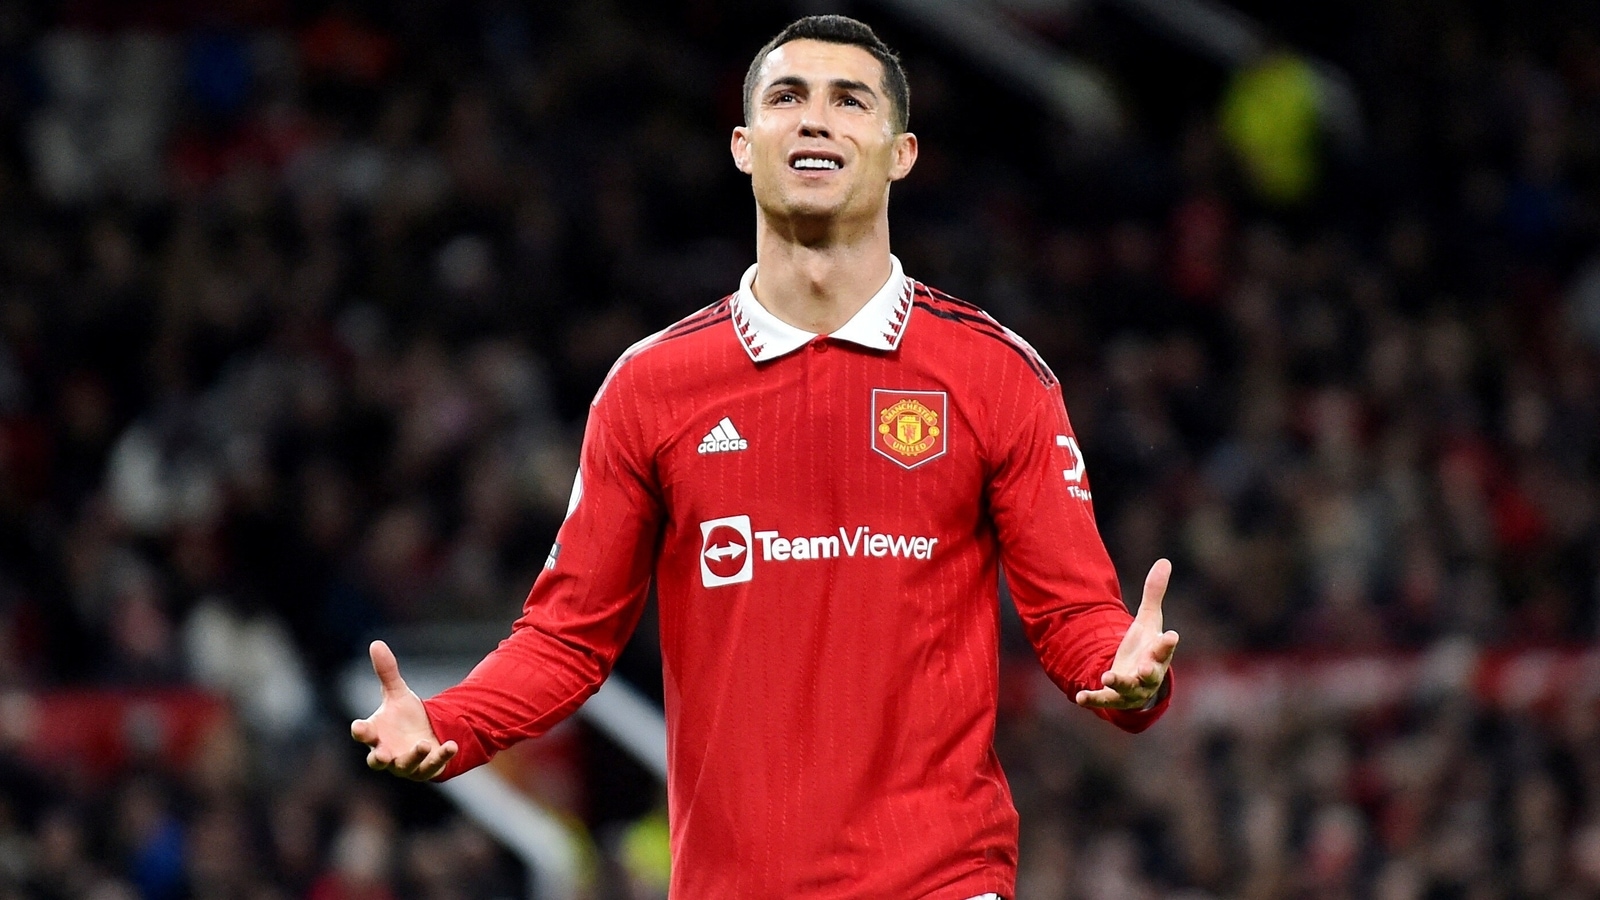 Man United part ways with Ronaldo after bombshell interview, Portugal captain to leave Old Trafford before season end